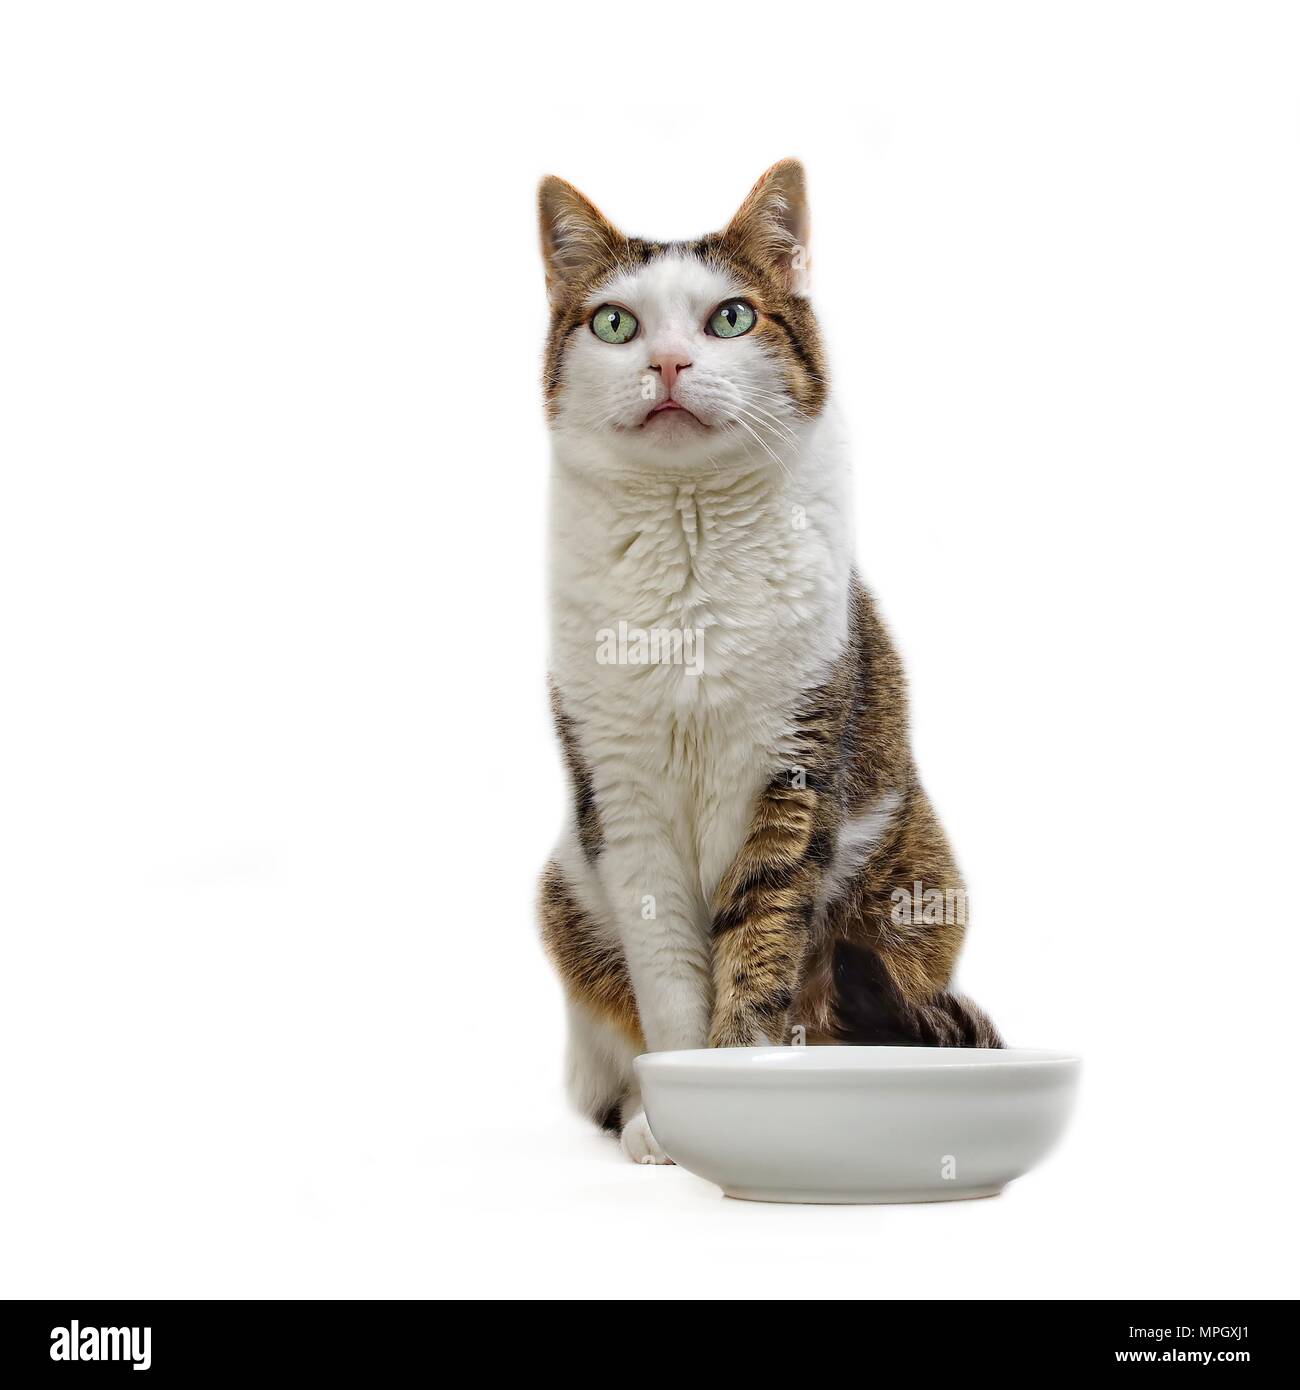 Old tabby cat sitting beside a food bowl and waiting for food - Isloatede on white background. Stock Photo